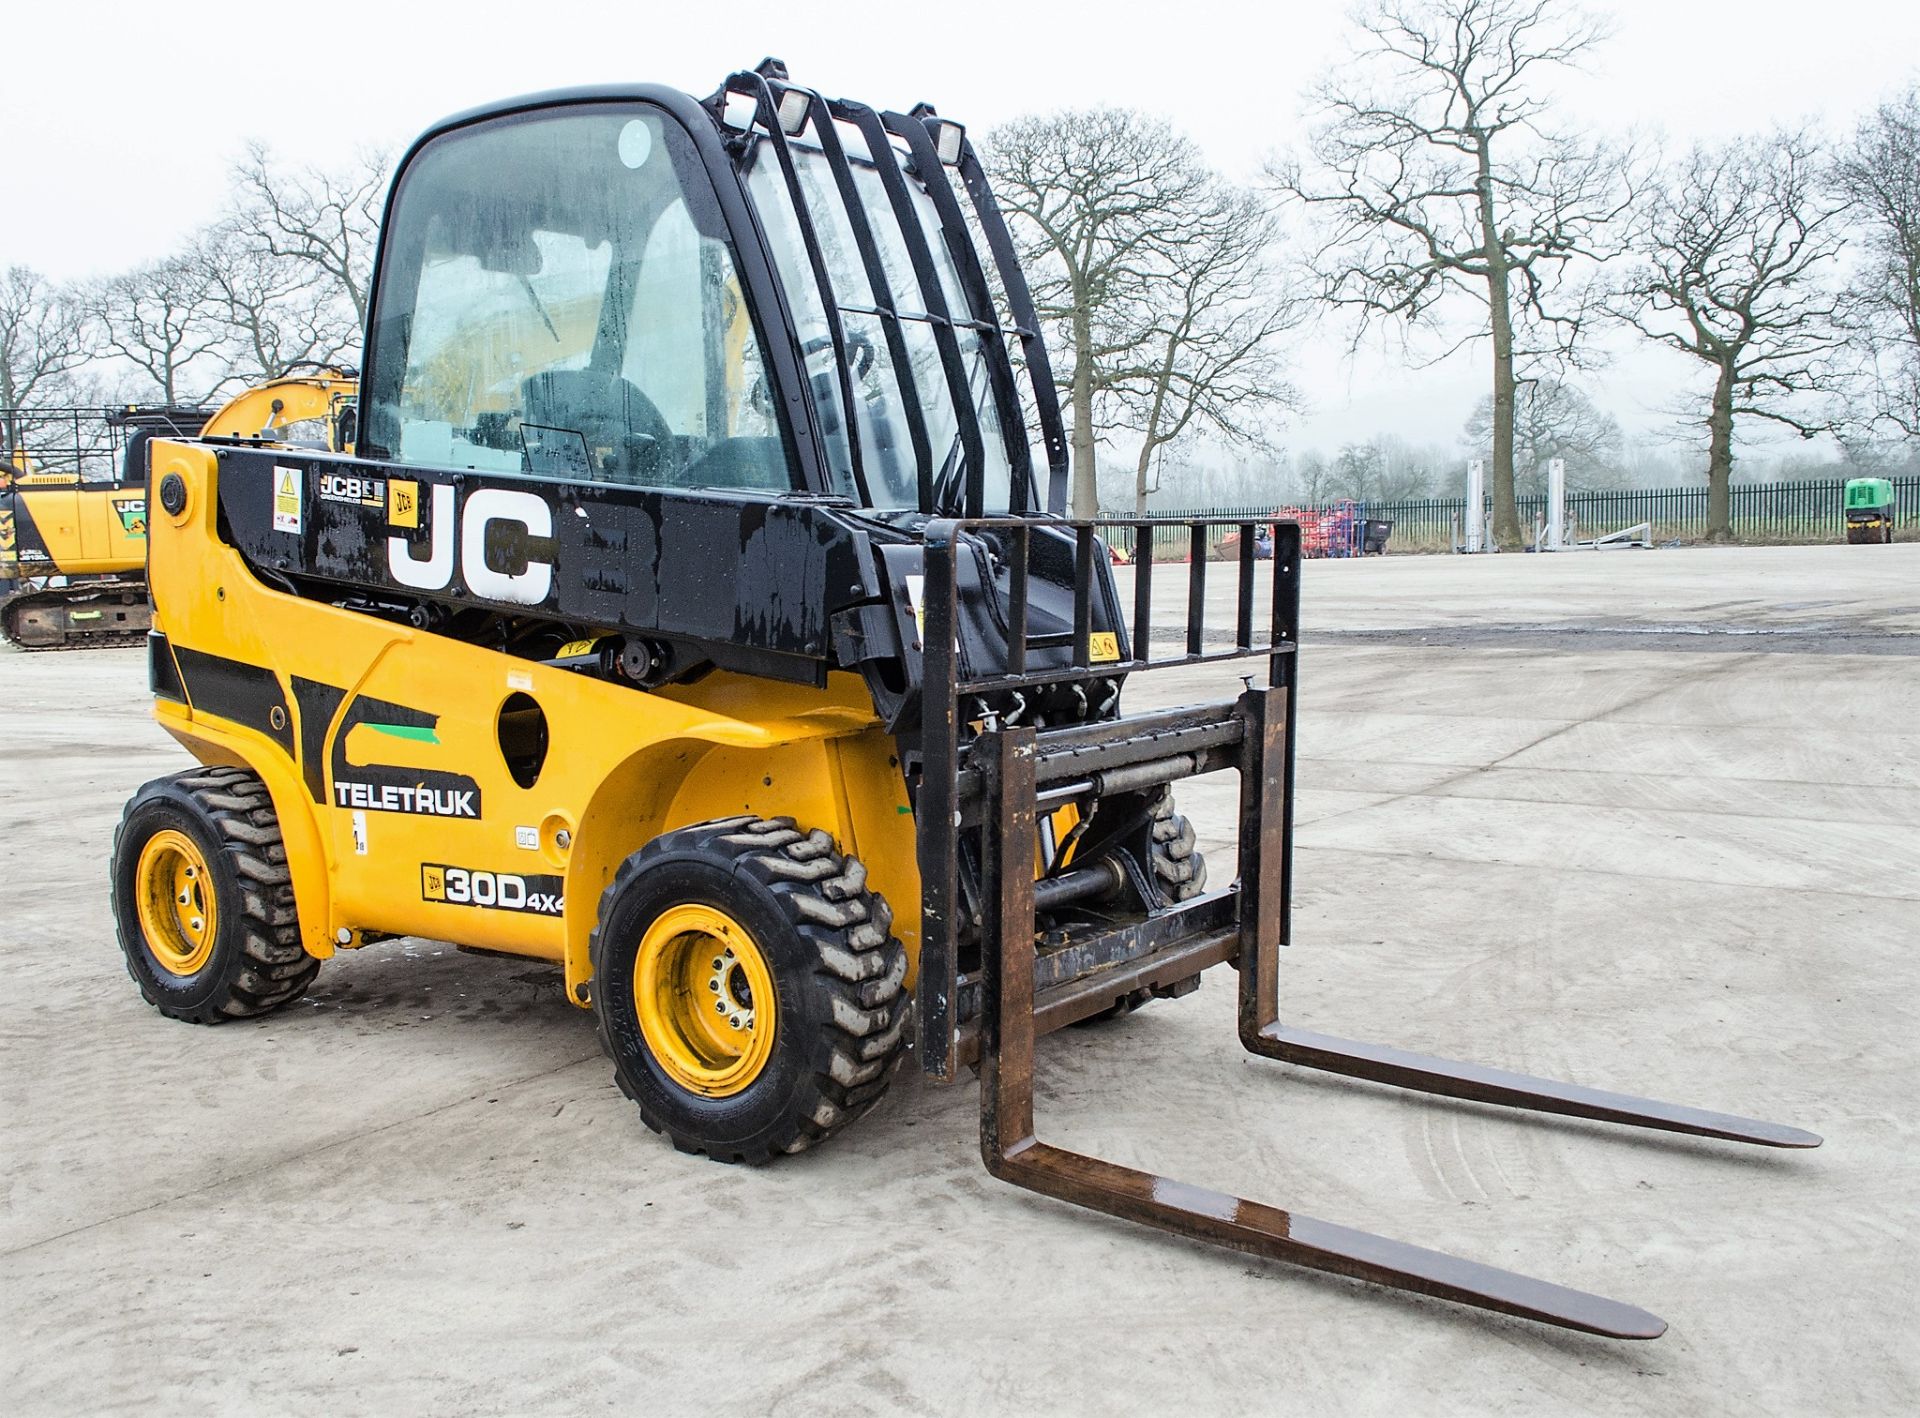 JCB Teletruk 30D 4x4 telescopic fork lift truck Year: 2013 S/N: 1541935 Recorded Hours: 1127 A623434 - Image 2 of 24